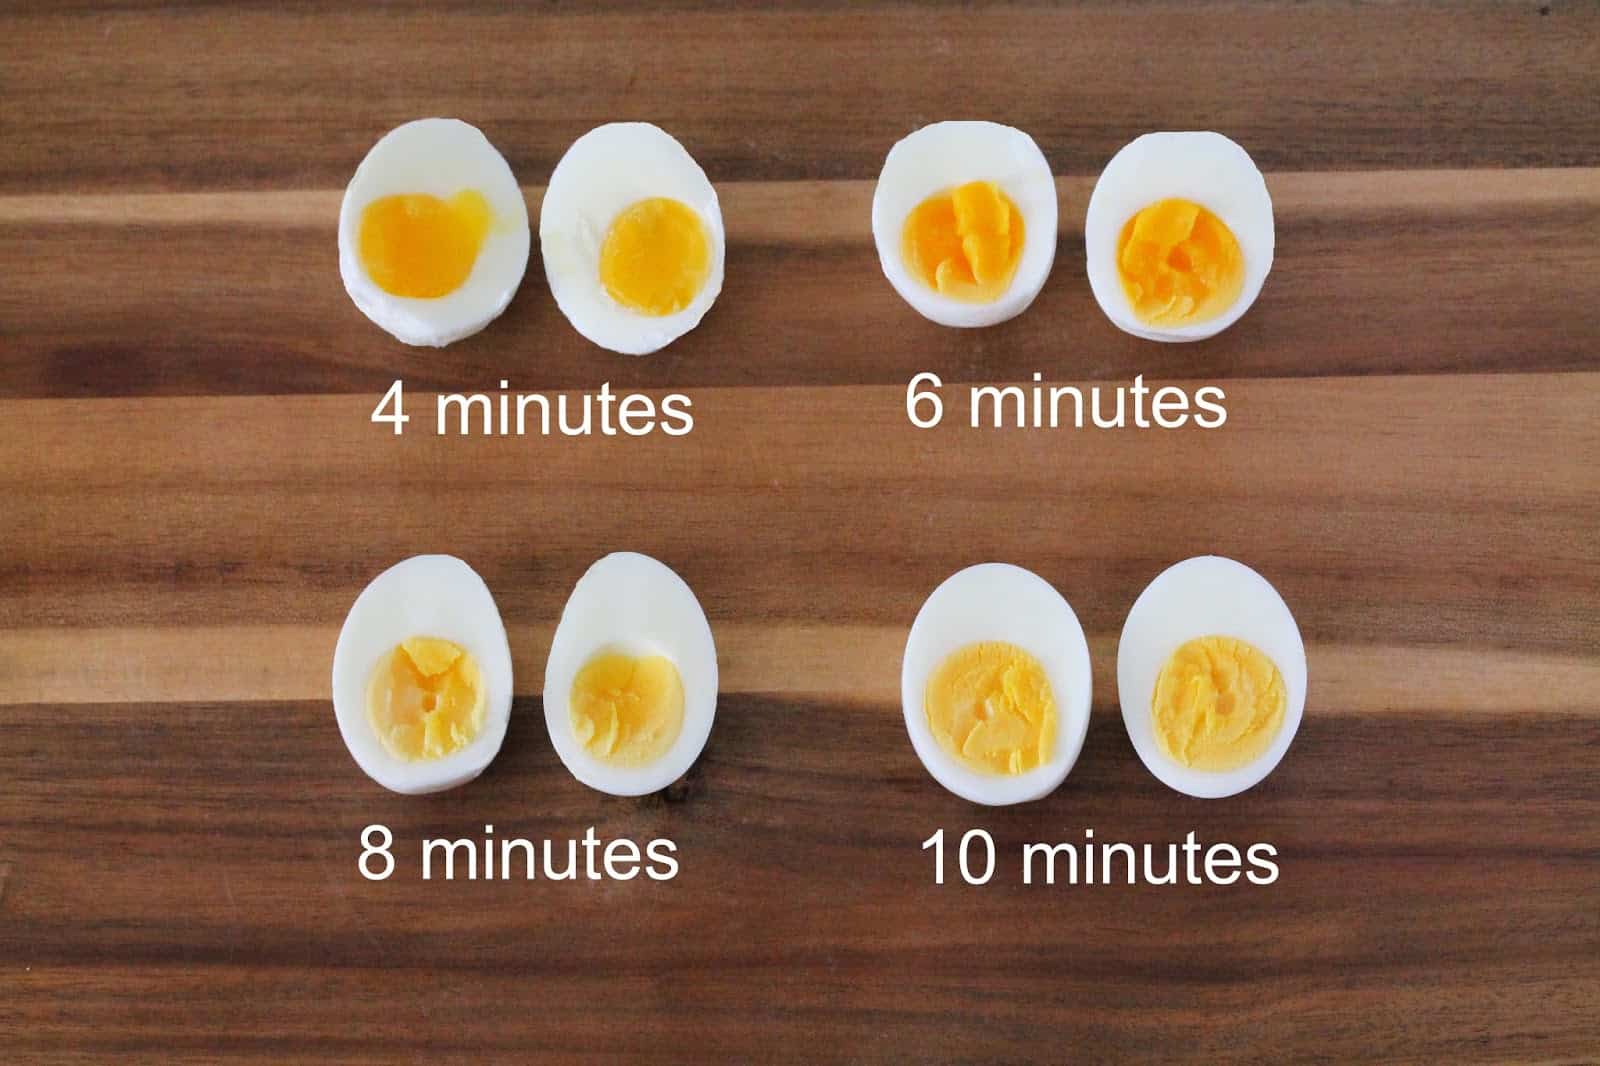 Hard Boiled Eggs at 4 minutes, 6 minutes, 8 minutes, and 10 minutes